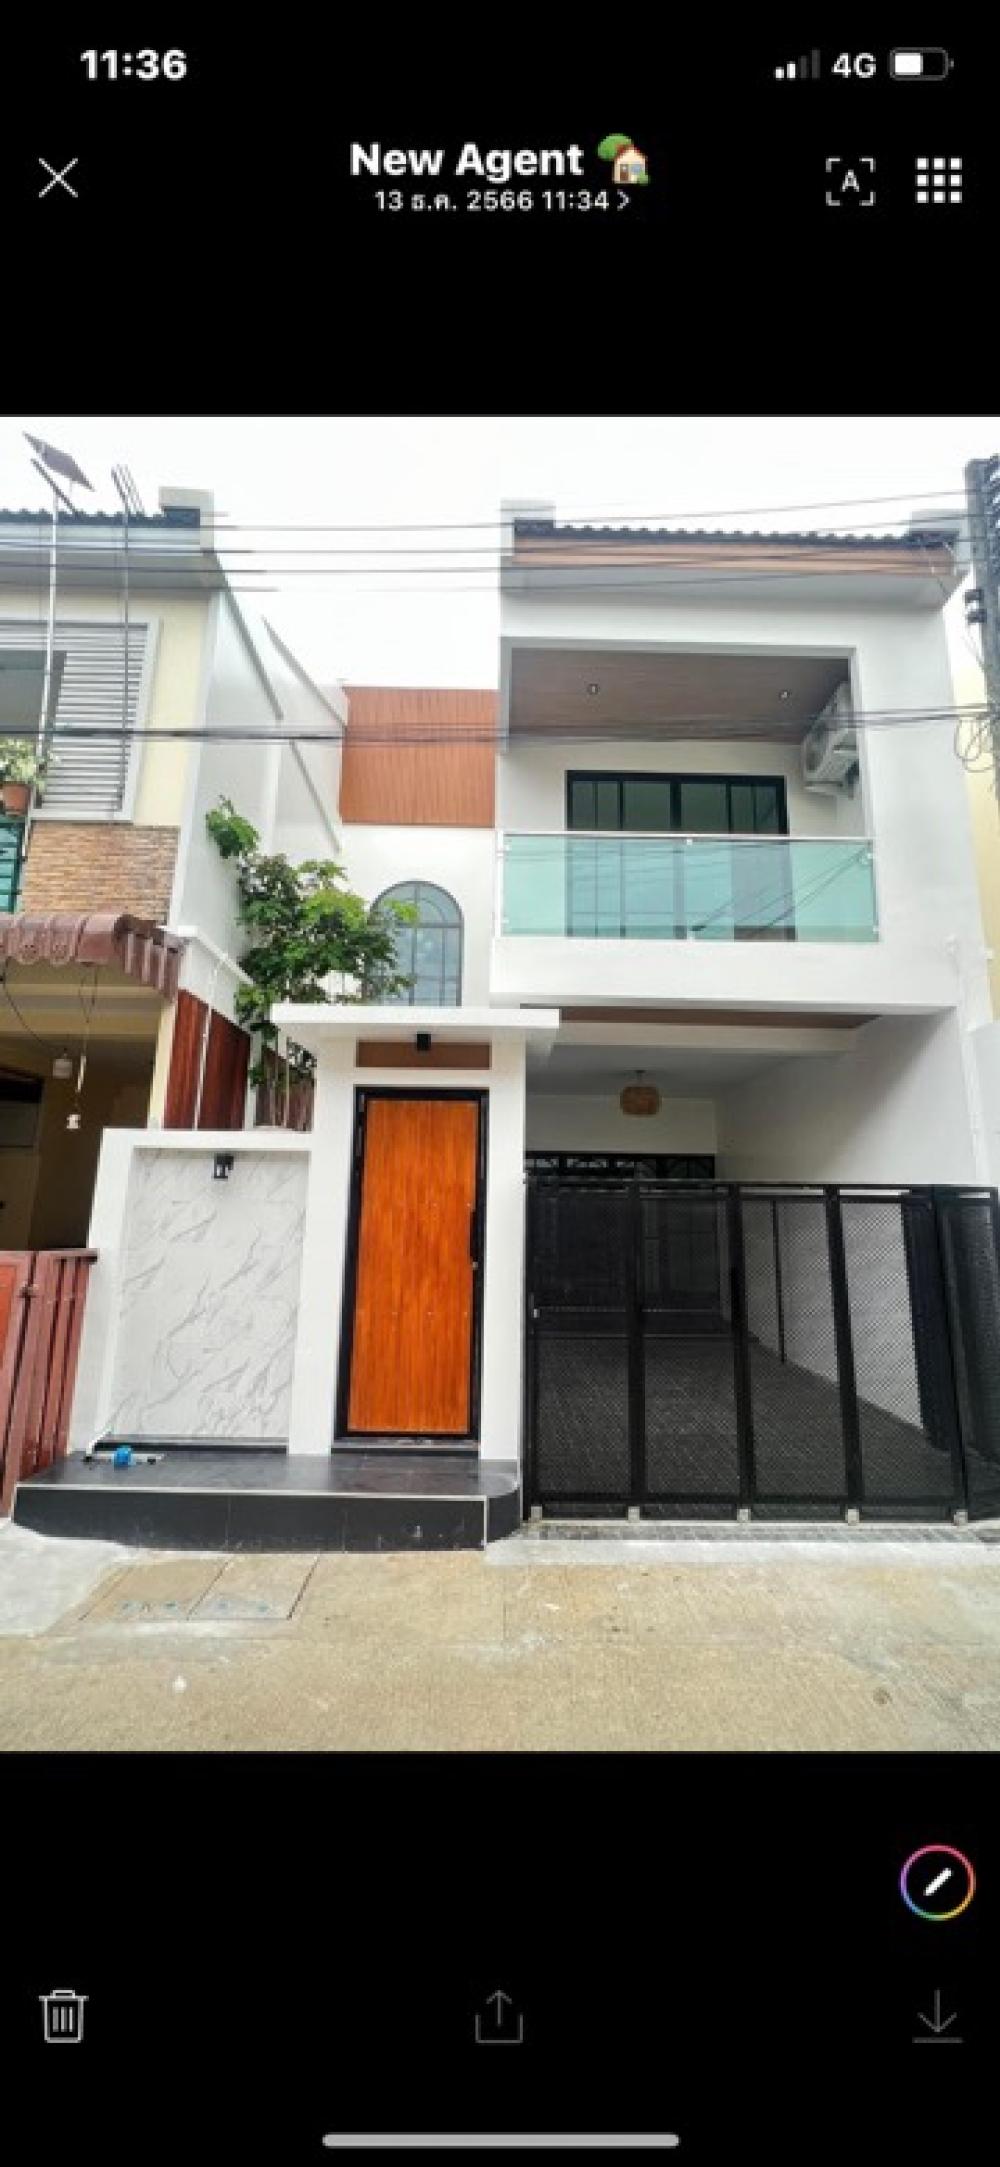 For SaleTownhousePhuket : Modern style house, 3 bedrooms, 3 bathrooms, can be rented out in a community area, buy for an investment of 12% per year, all new furniture. Near Villa Market, Chalong Pier, near the beach, near the hospital, restaurants, markets